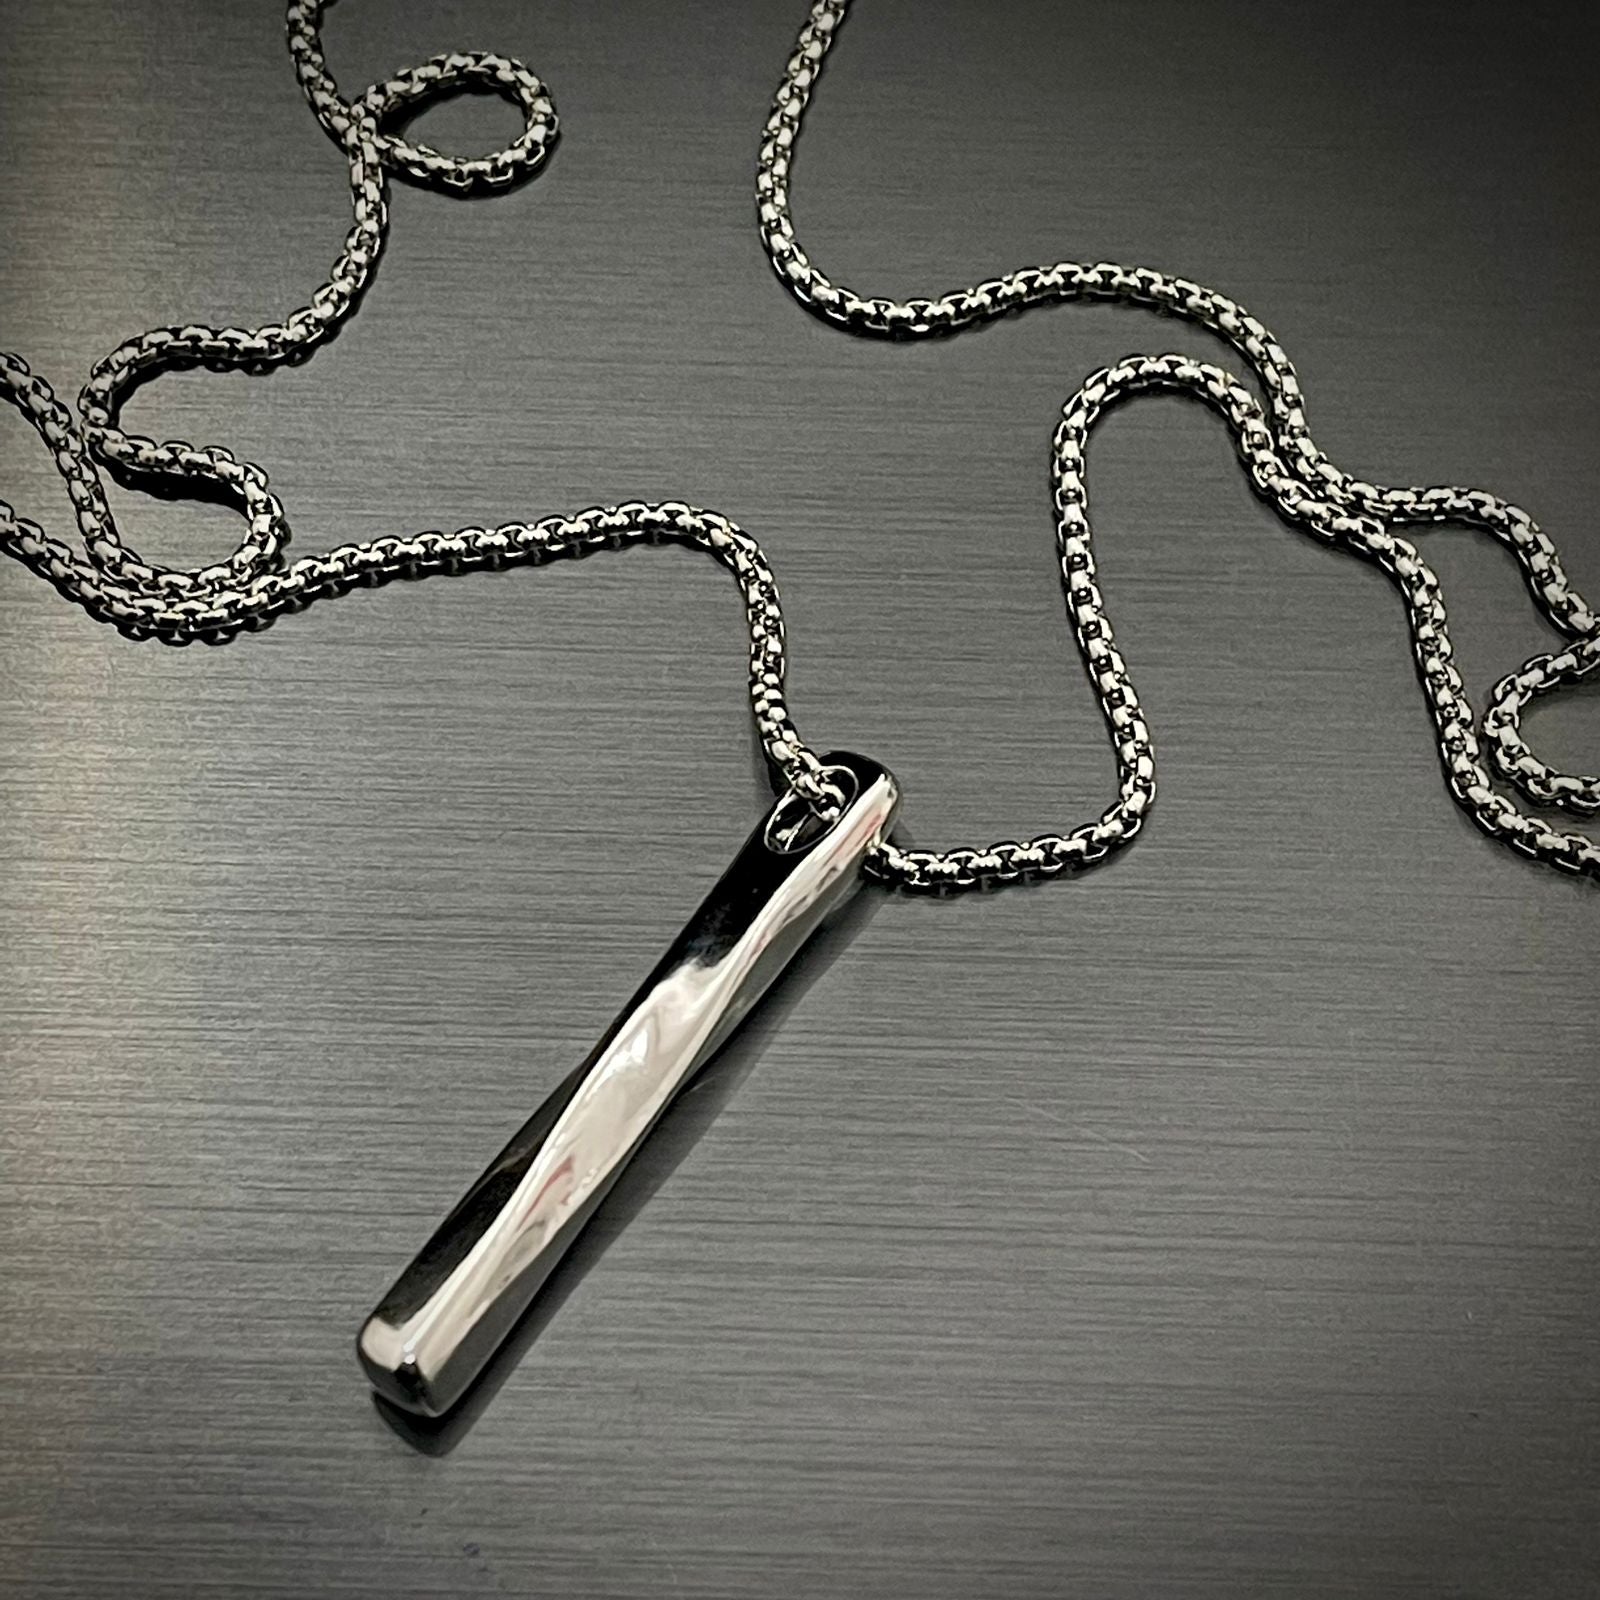 Silver twisted bar pendant necklace with chain online in Pakistan